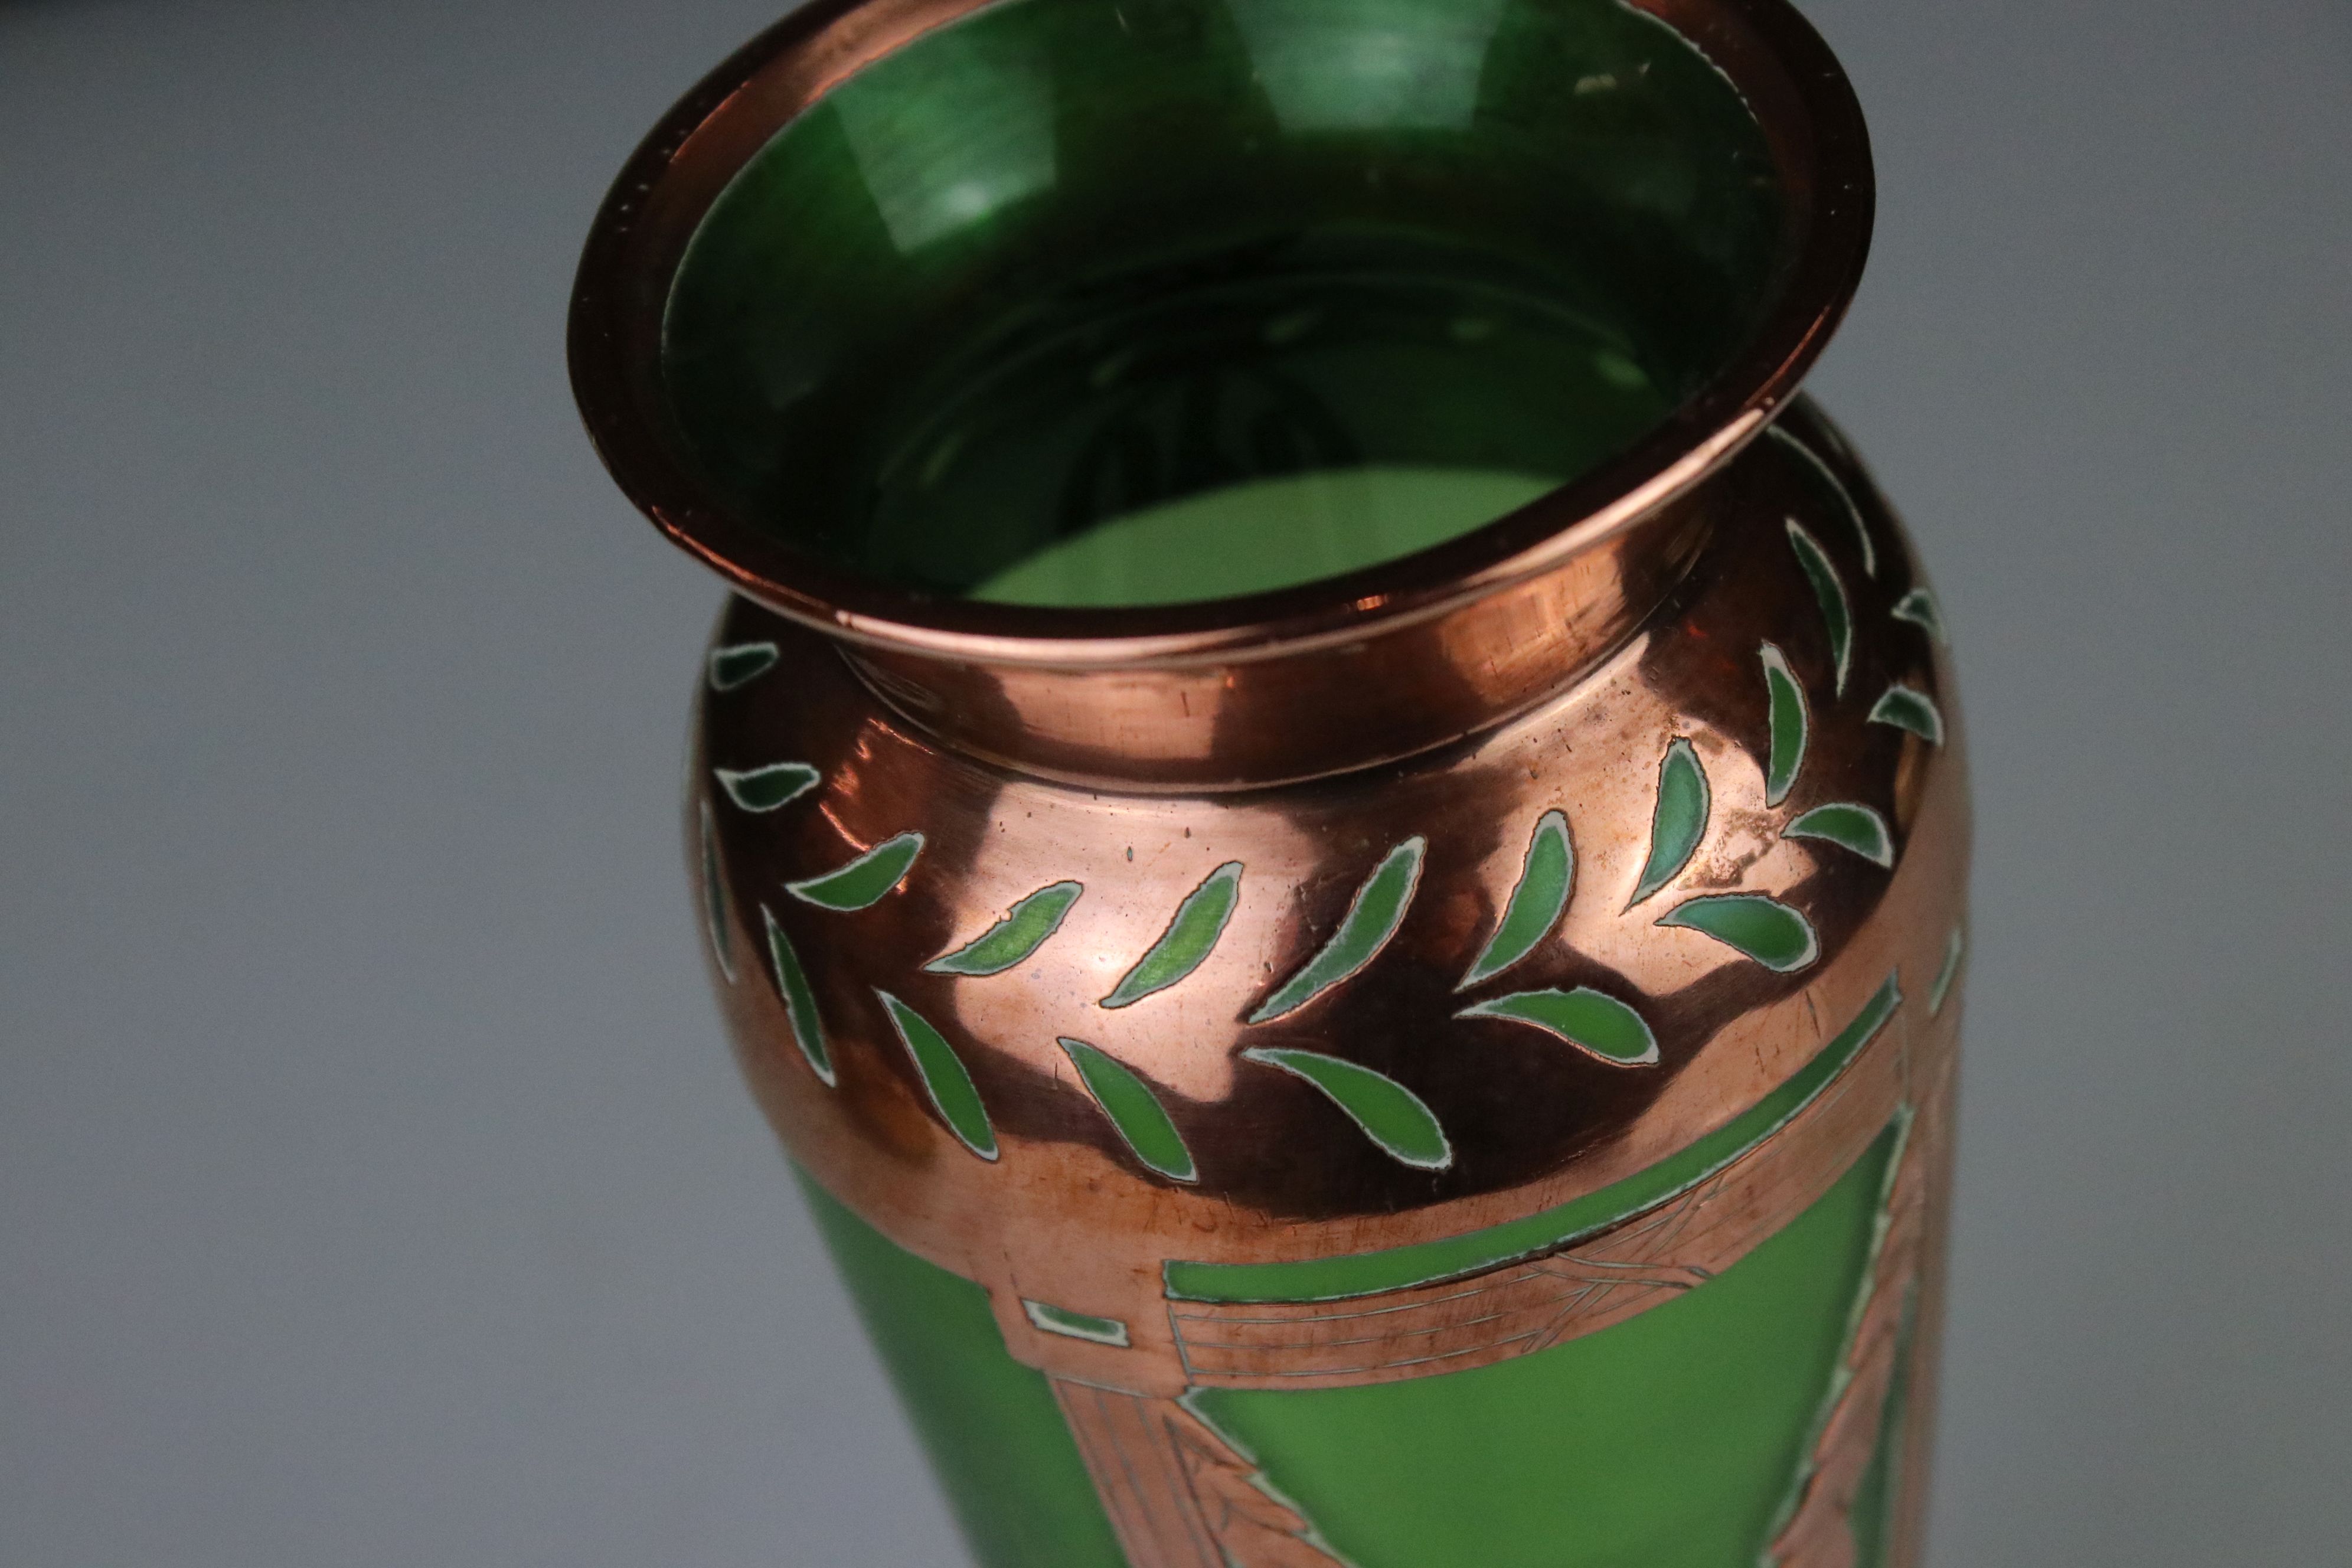 Late 19th / Early 20th century Austrian style Secessionist Green Glass Vase with Copper overlay, - Image 2 of 4